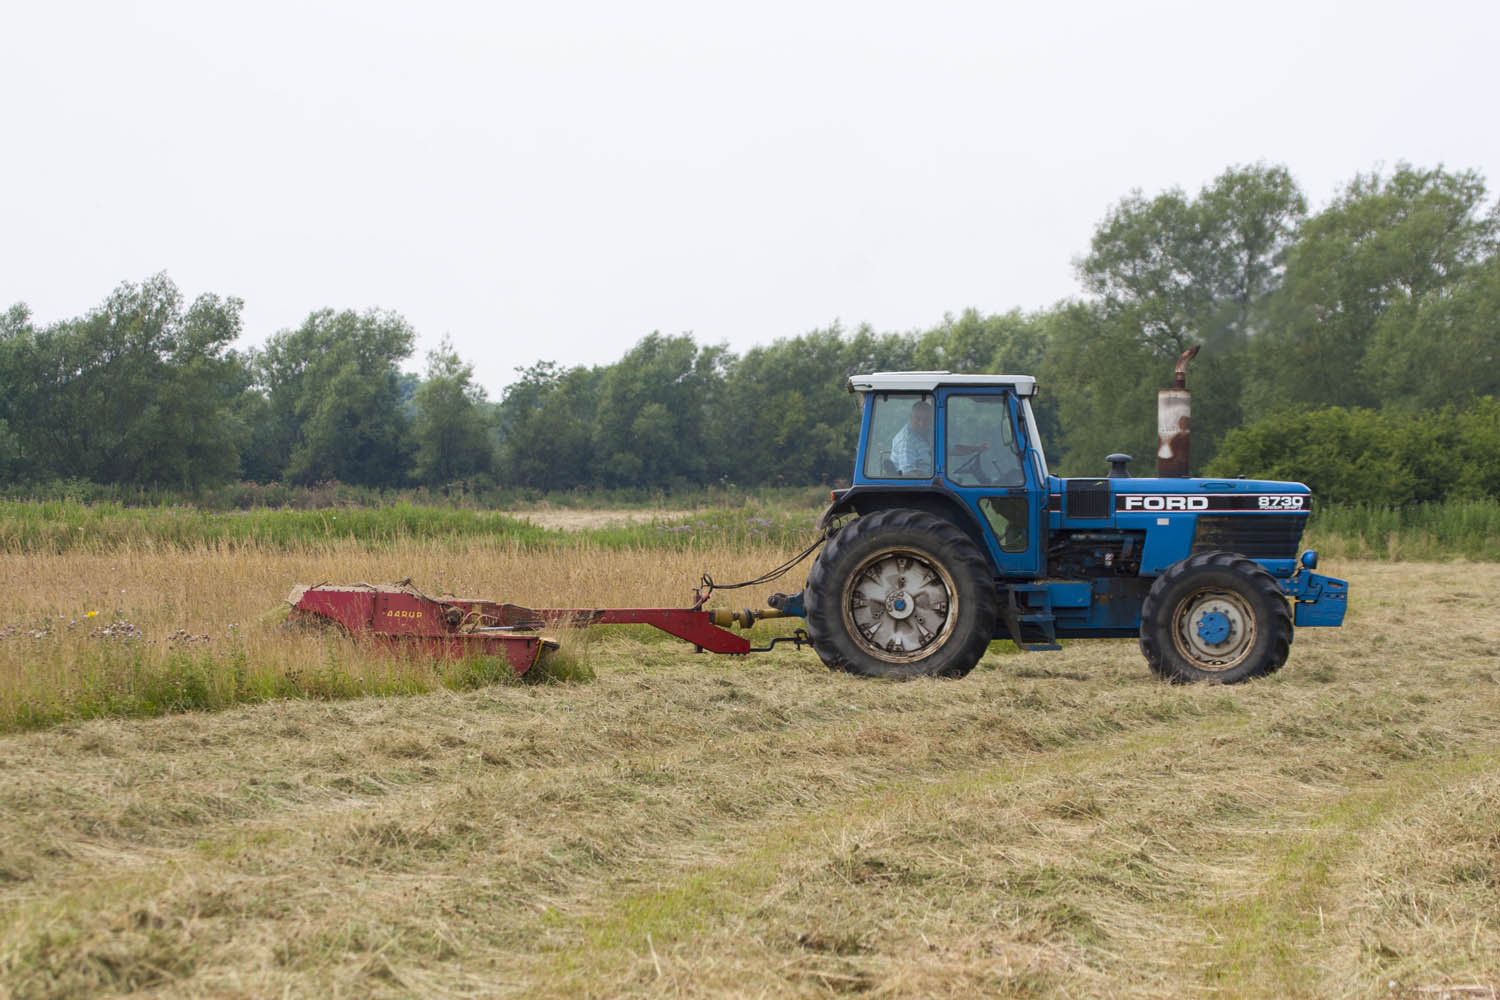 Image of tractor cutting meadow - copyright Mike Dodd